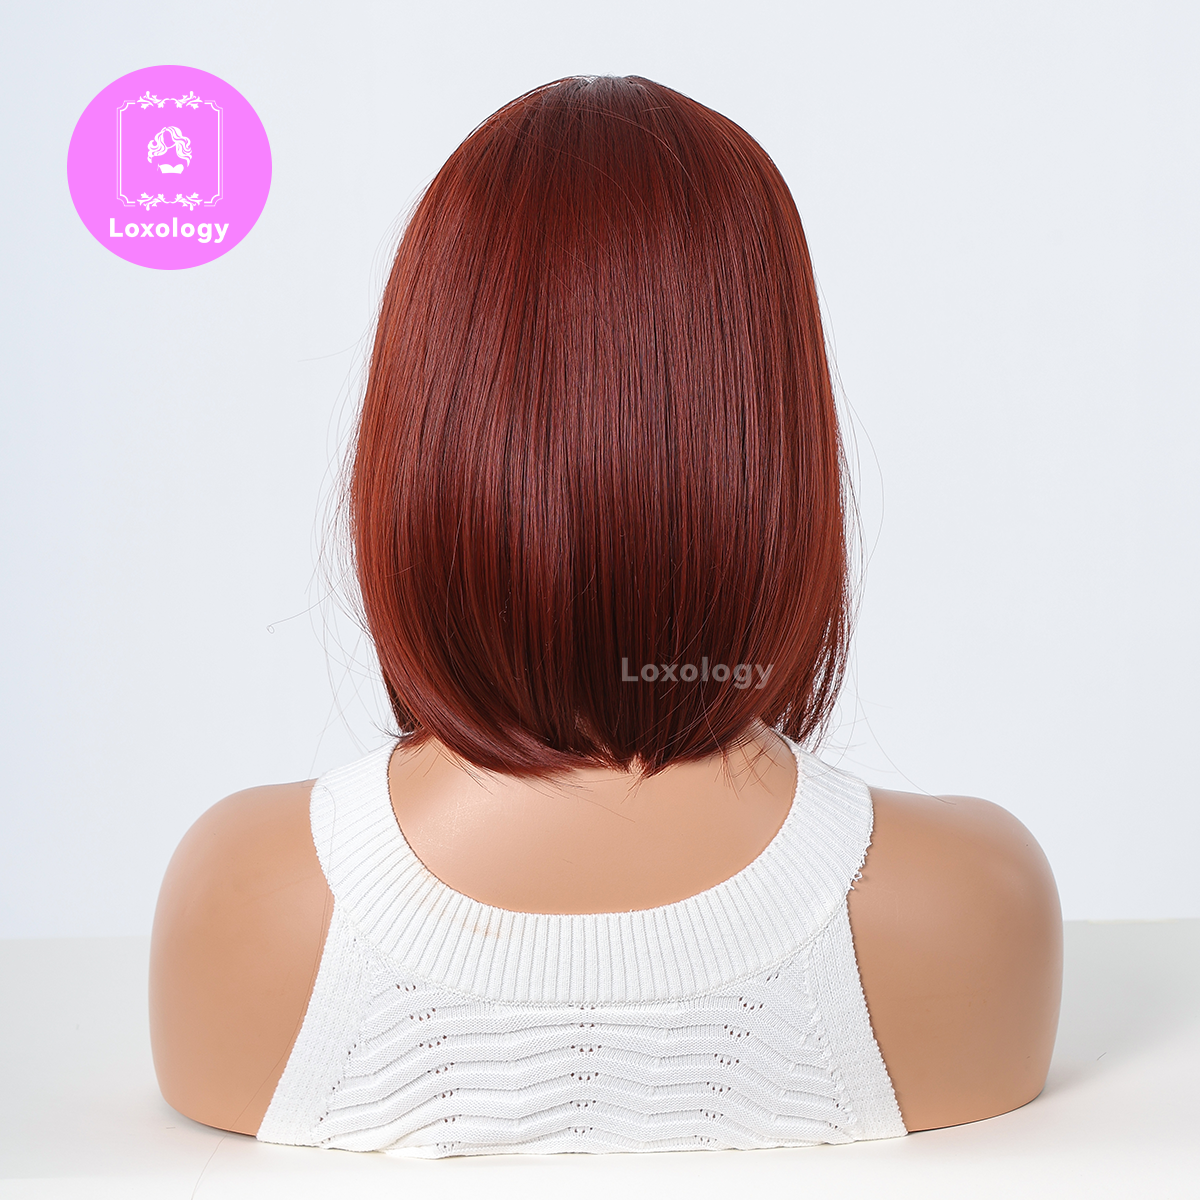 【Zoey】Loxology | 14 Inch red short bobo straight wigs red for women